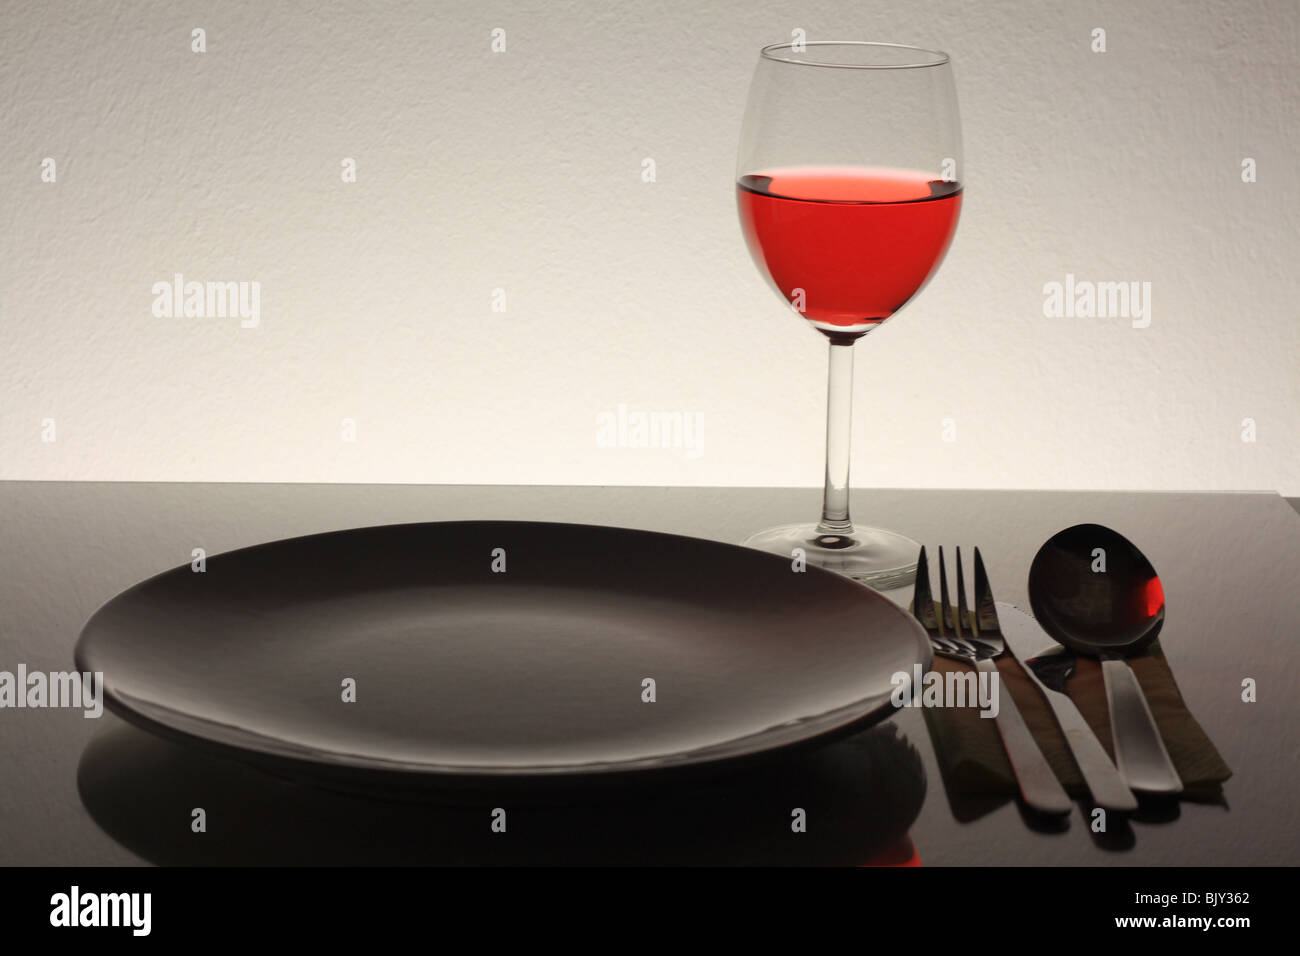 wine glass, fork knife, plate and spoon Stock Photo